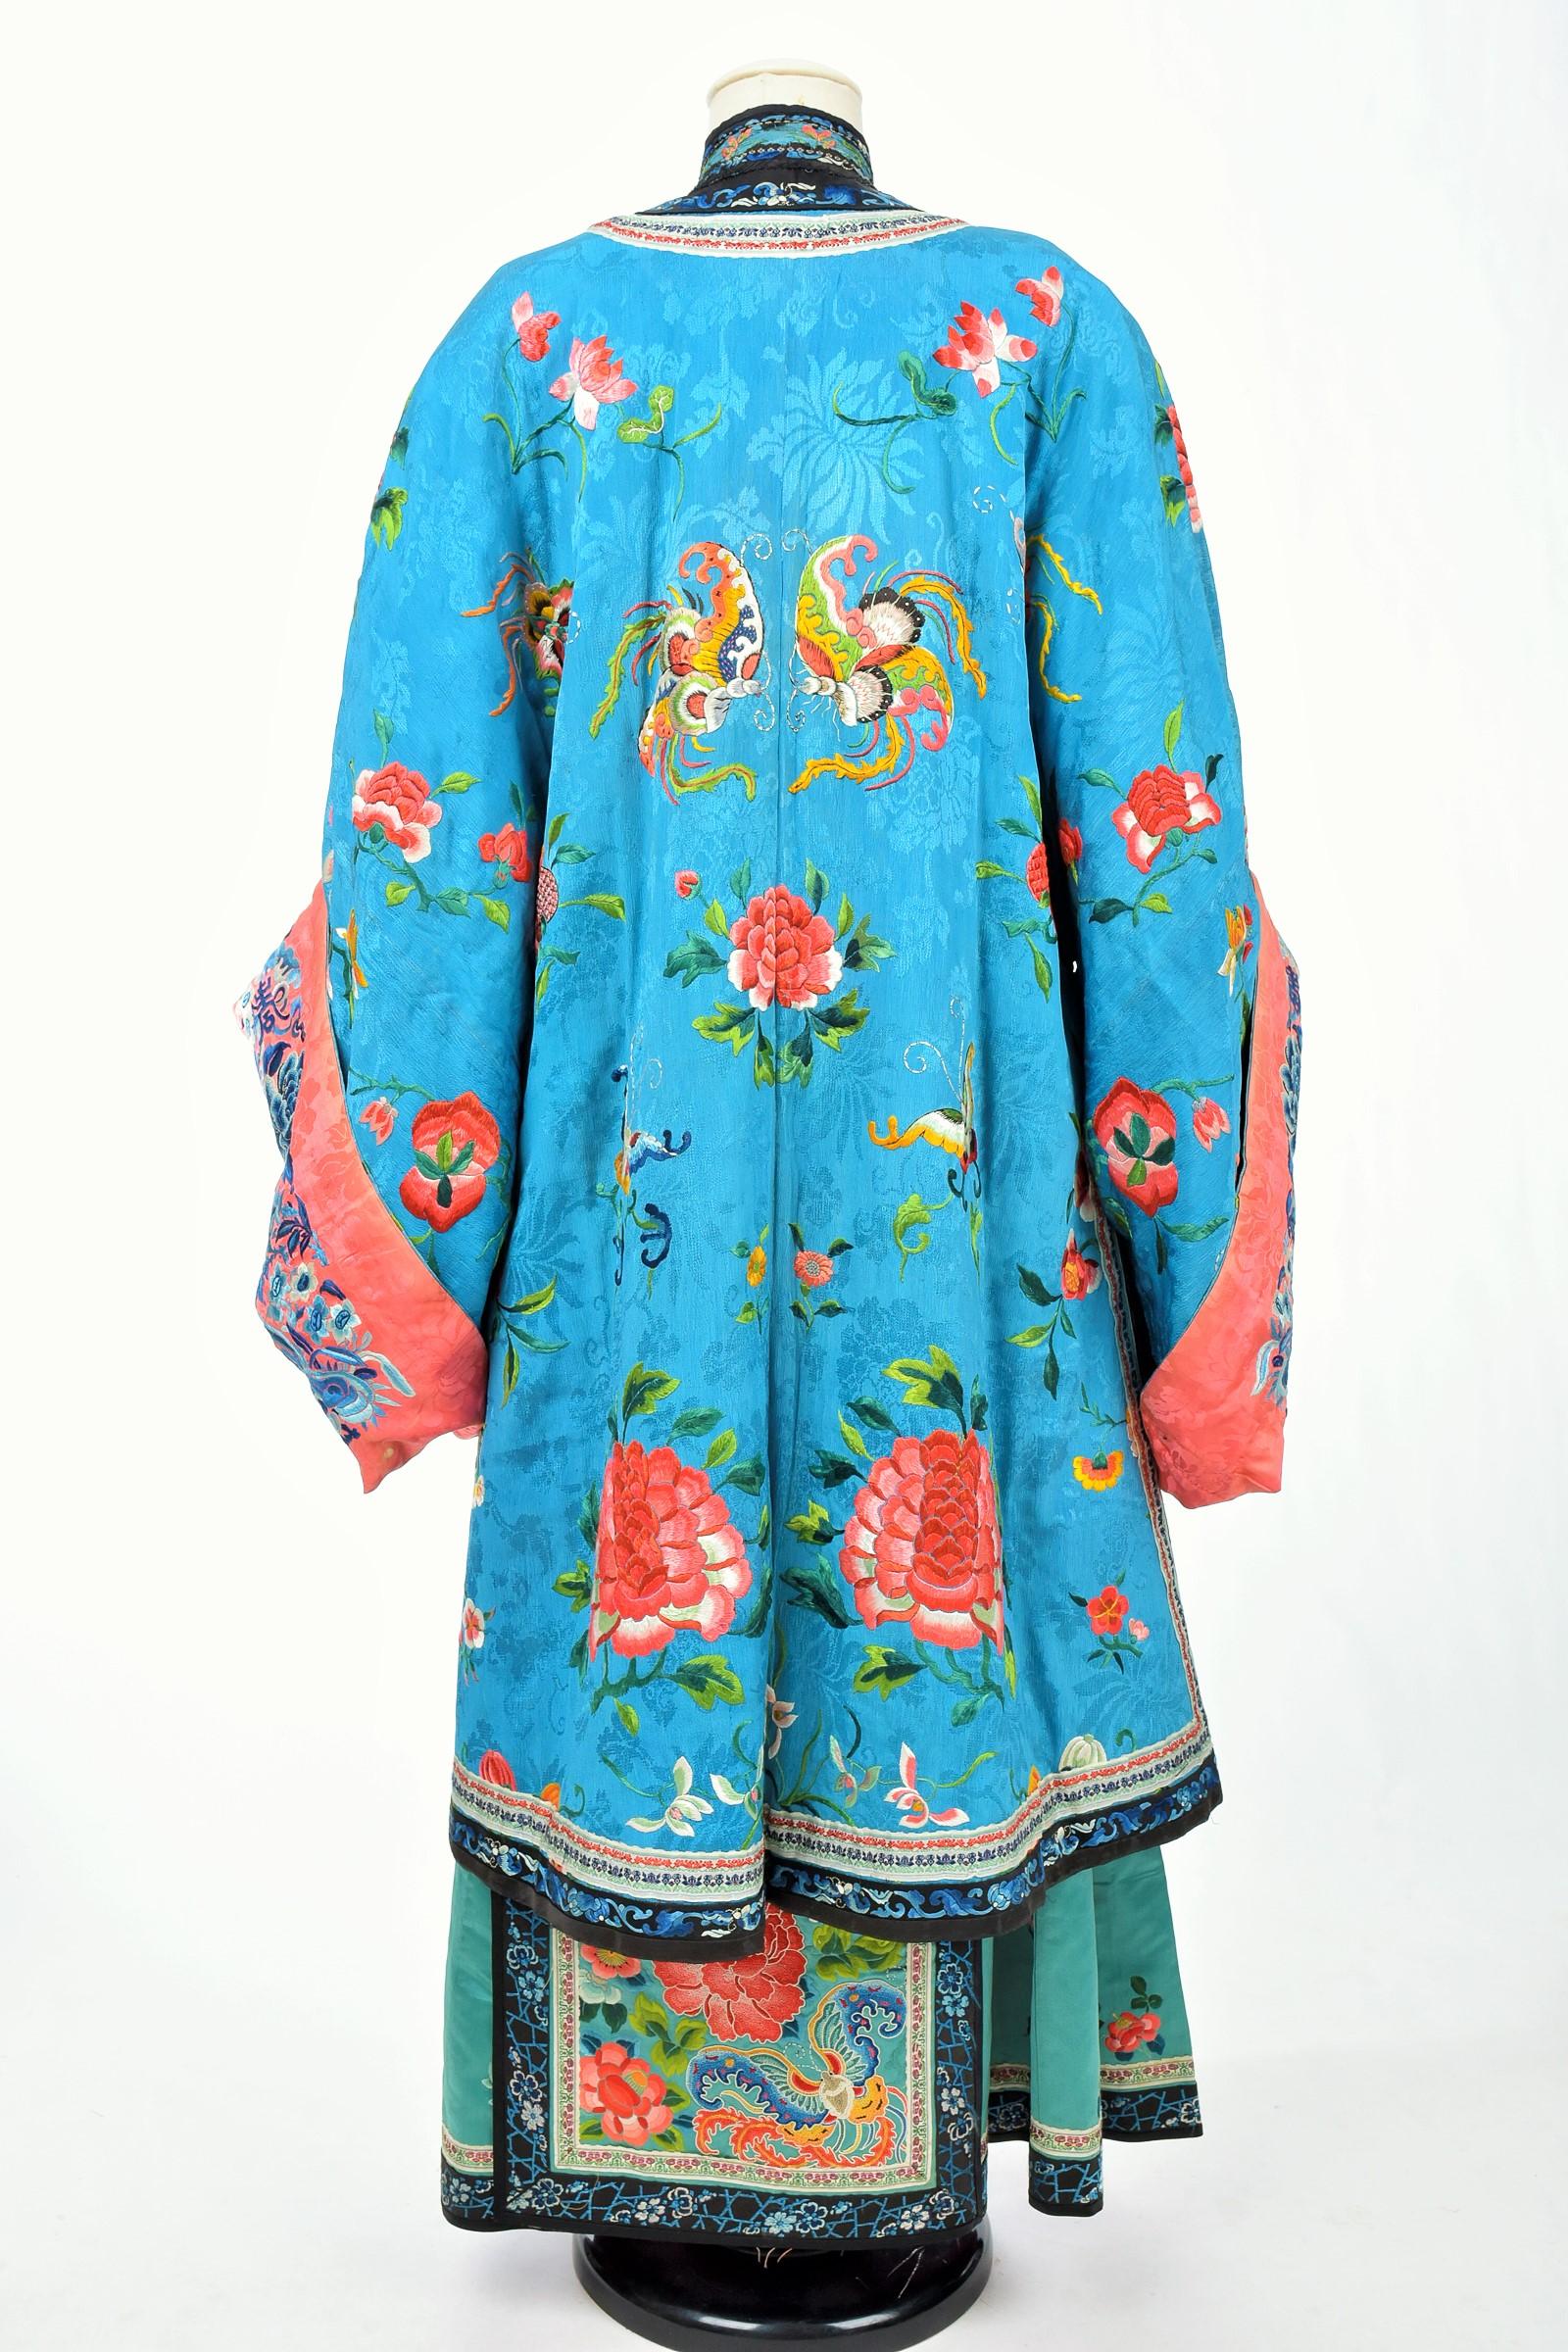 Semi Formal Silk Embroidered Manchu Woman's Skirt and Dress Qing period C.1900 7